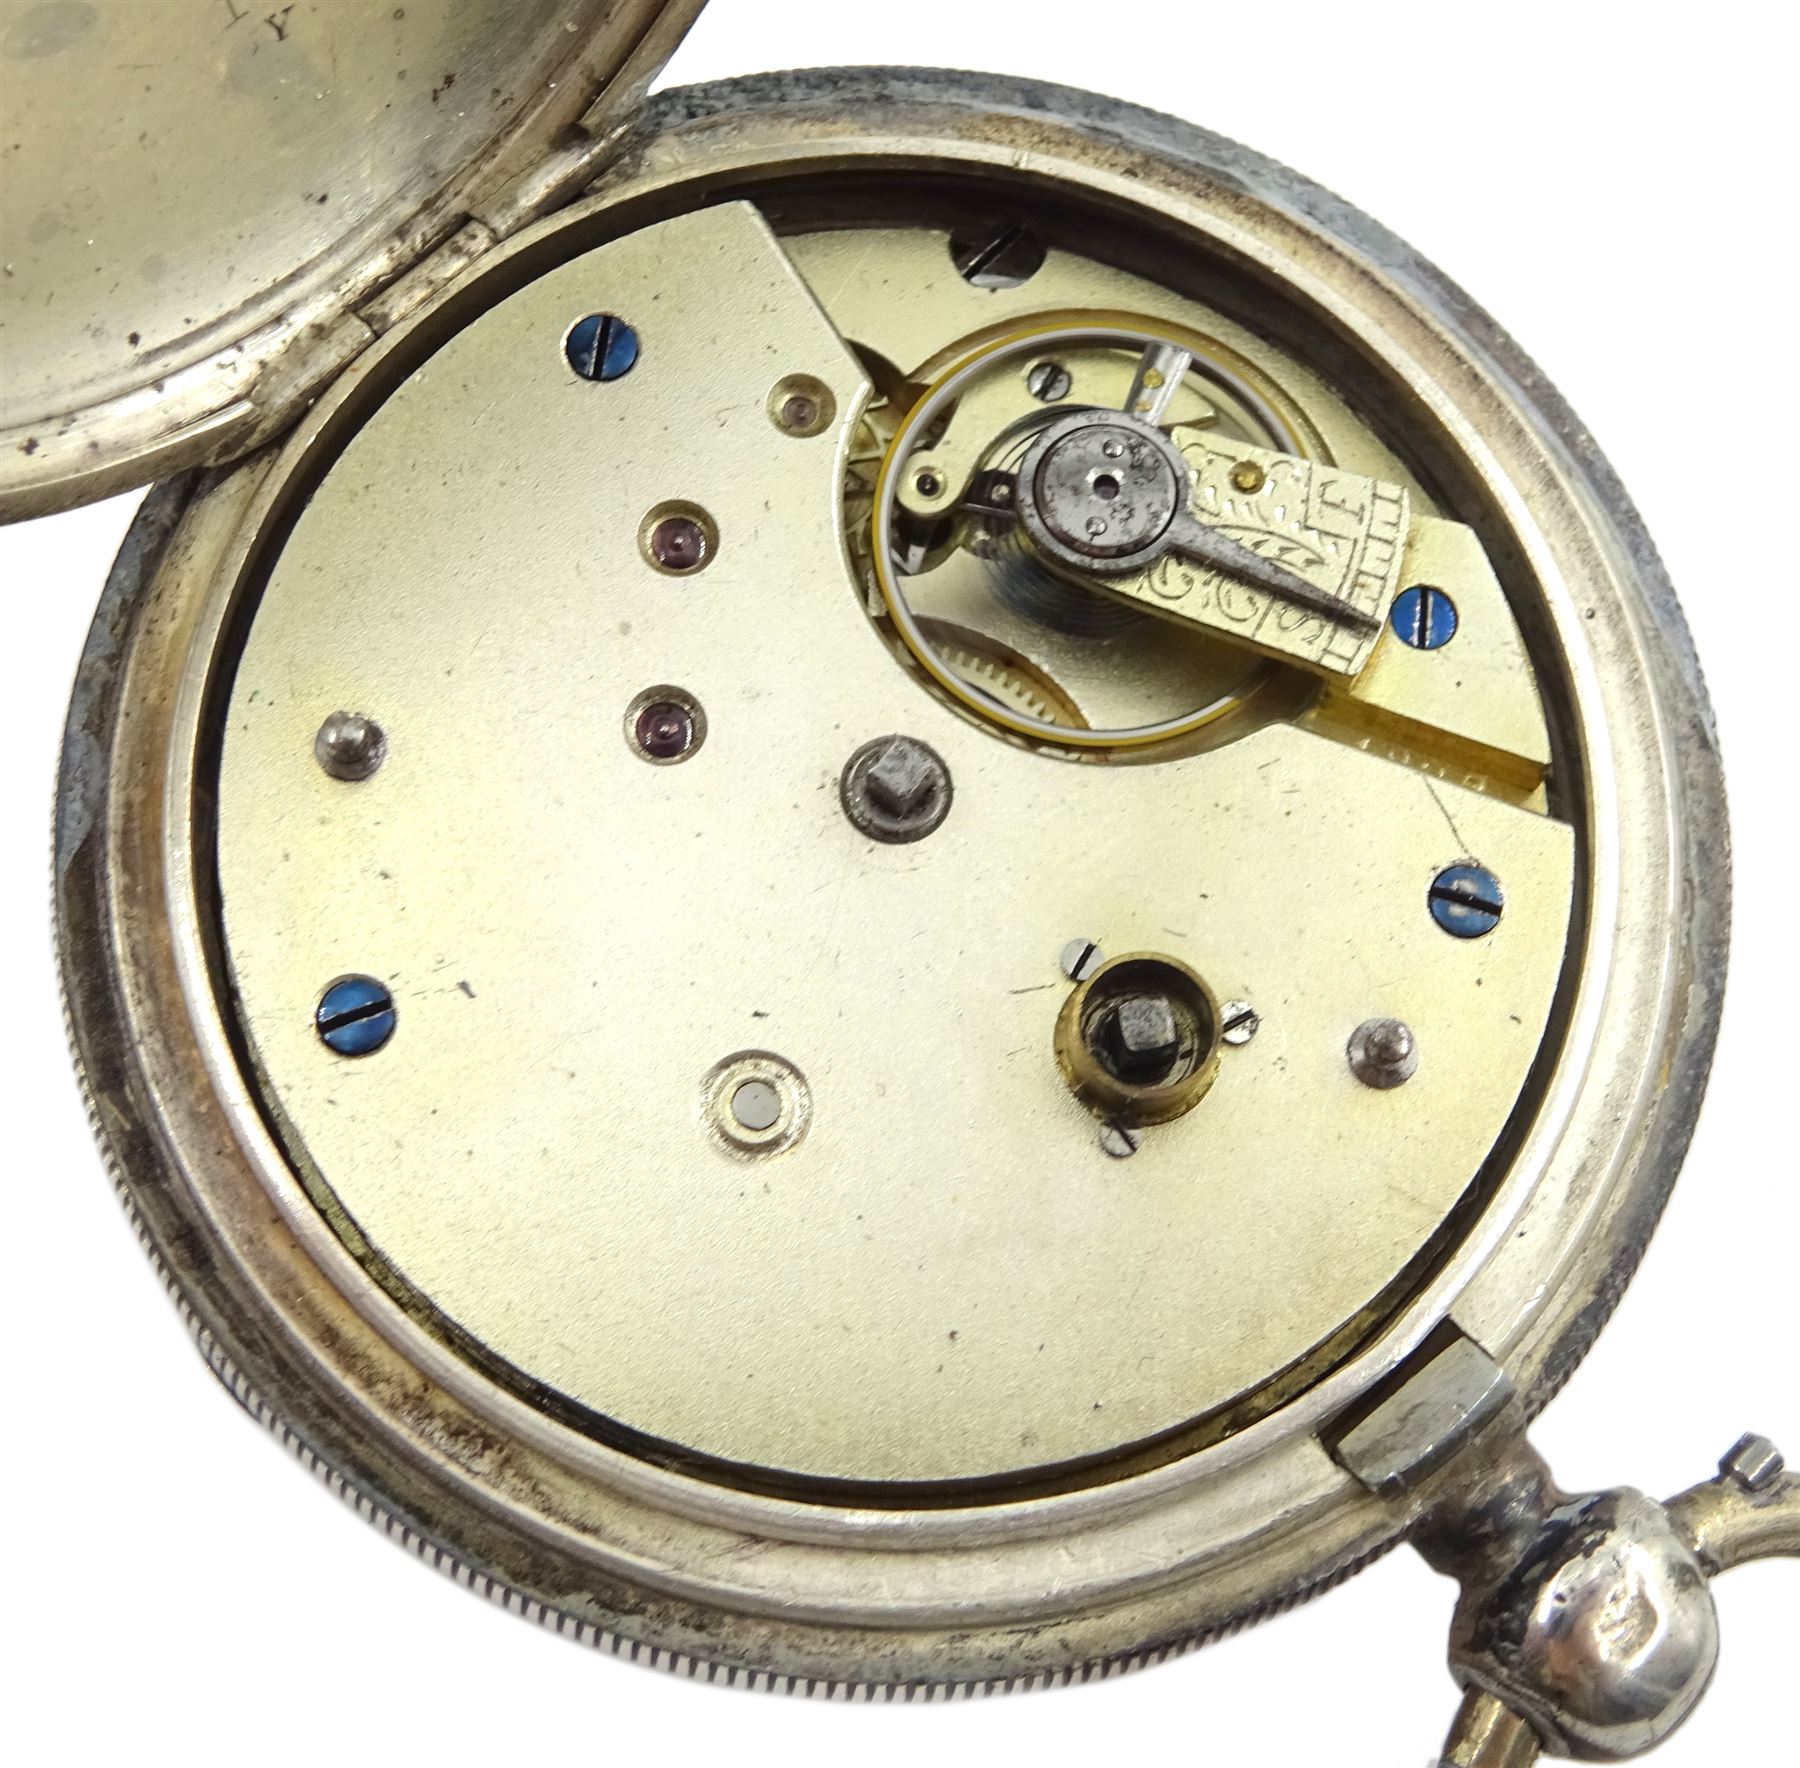 Edwardian silver open face 'The Express English Lever' pocket watch by J. G. Graves - Image 4 of 4